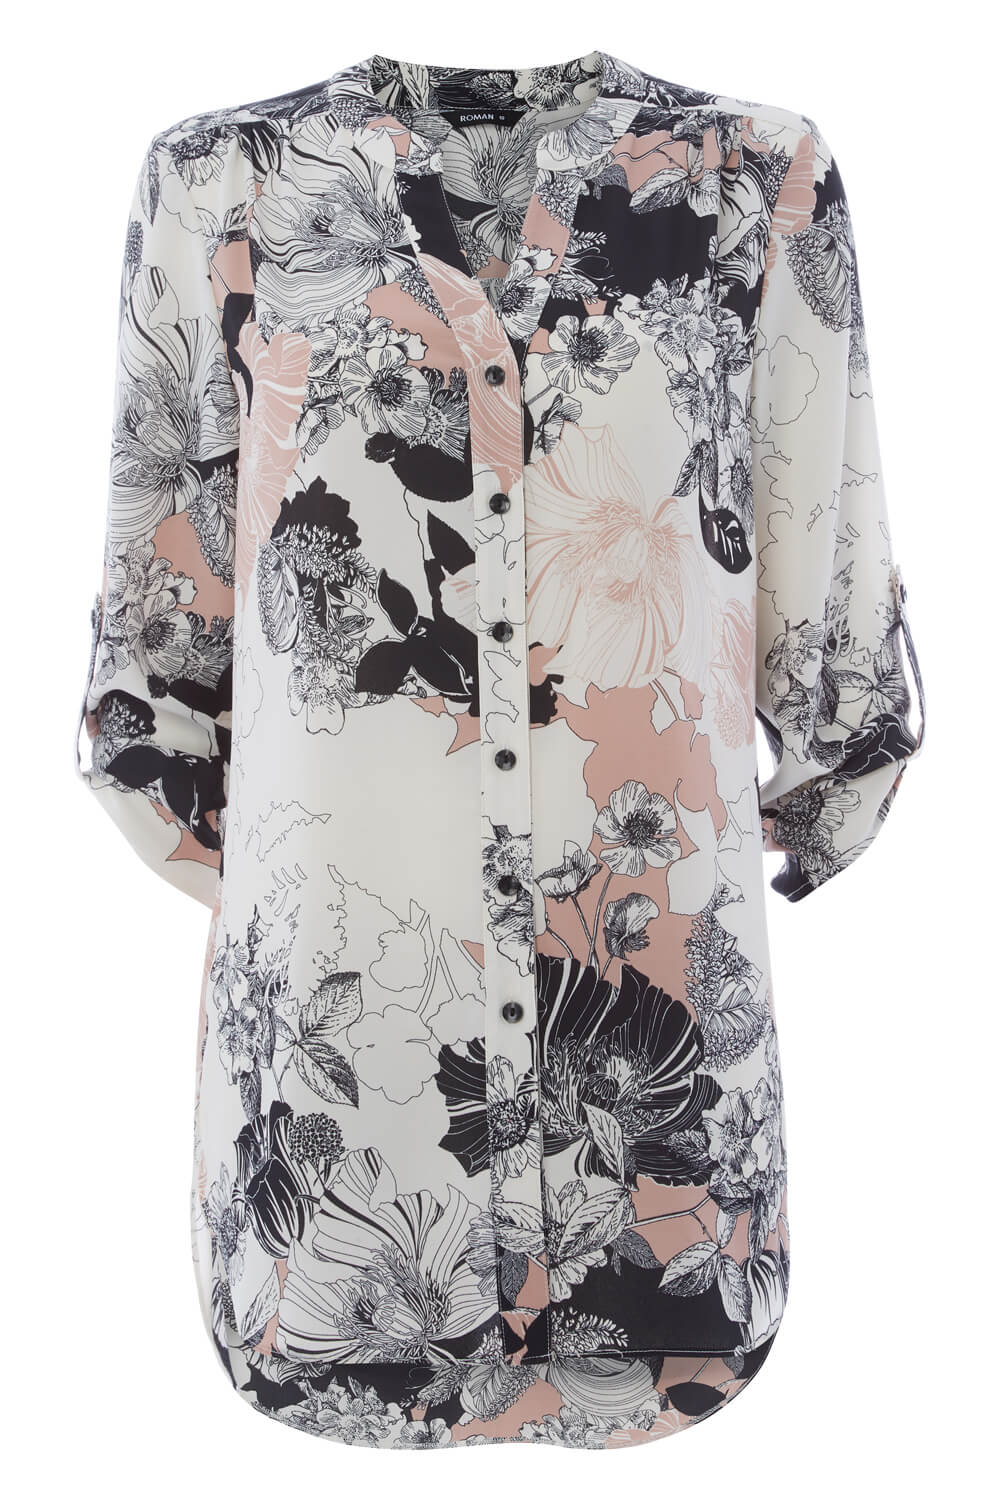 PINK Floral Roll Sleeve Shirt, Image 4 of 4